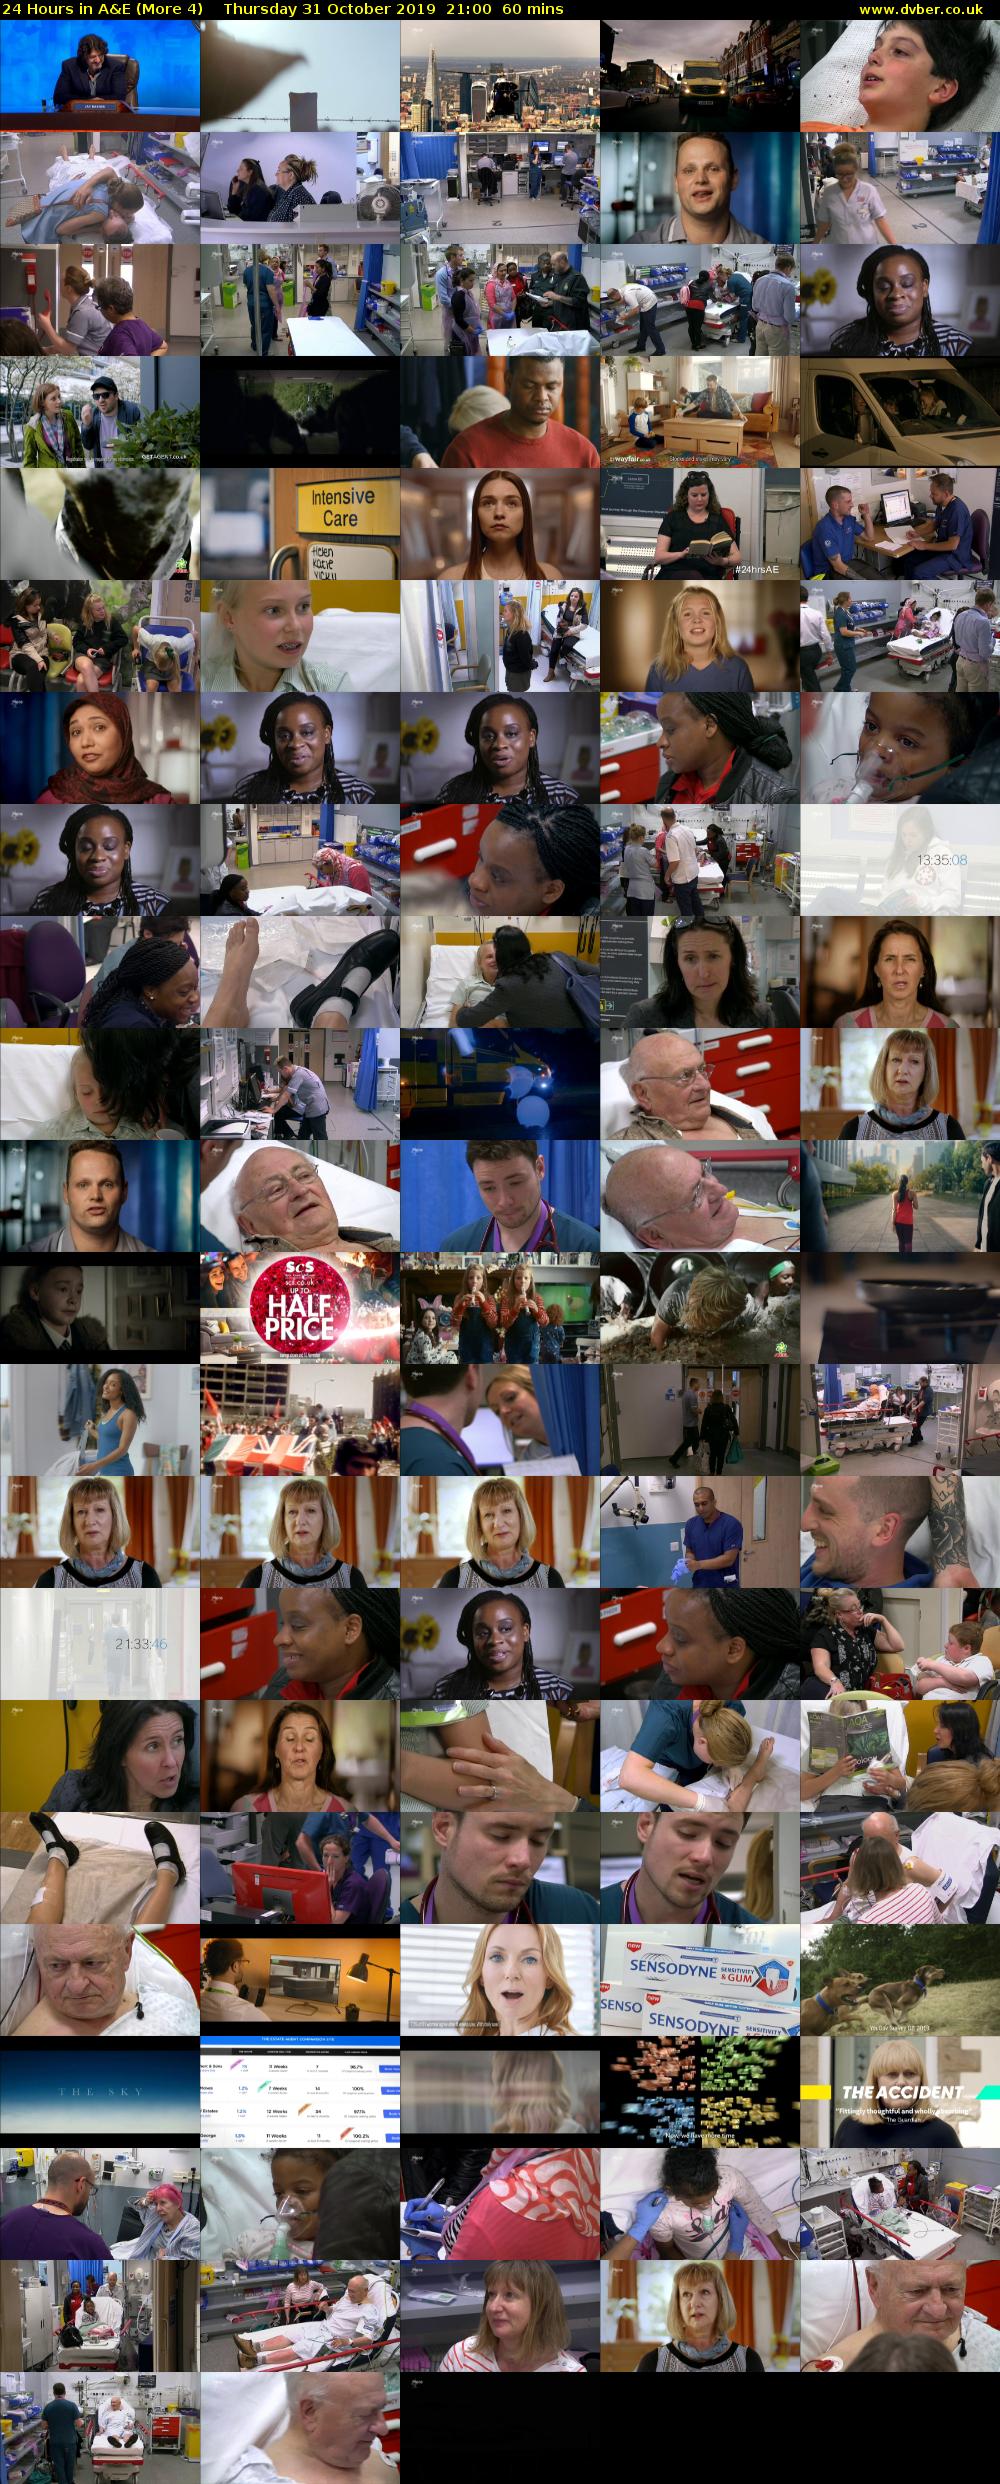 24 Hours in A&E (More 4) Thursday 31 October 2019 21:00 - 22:00